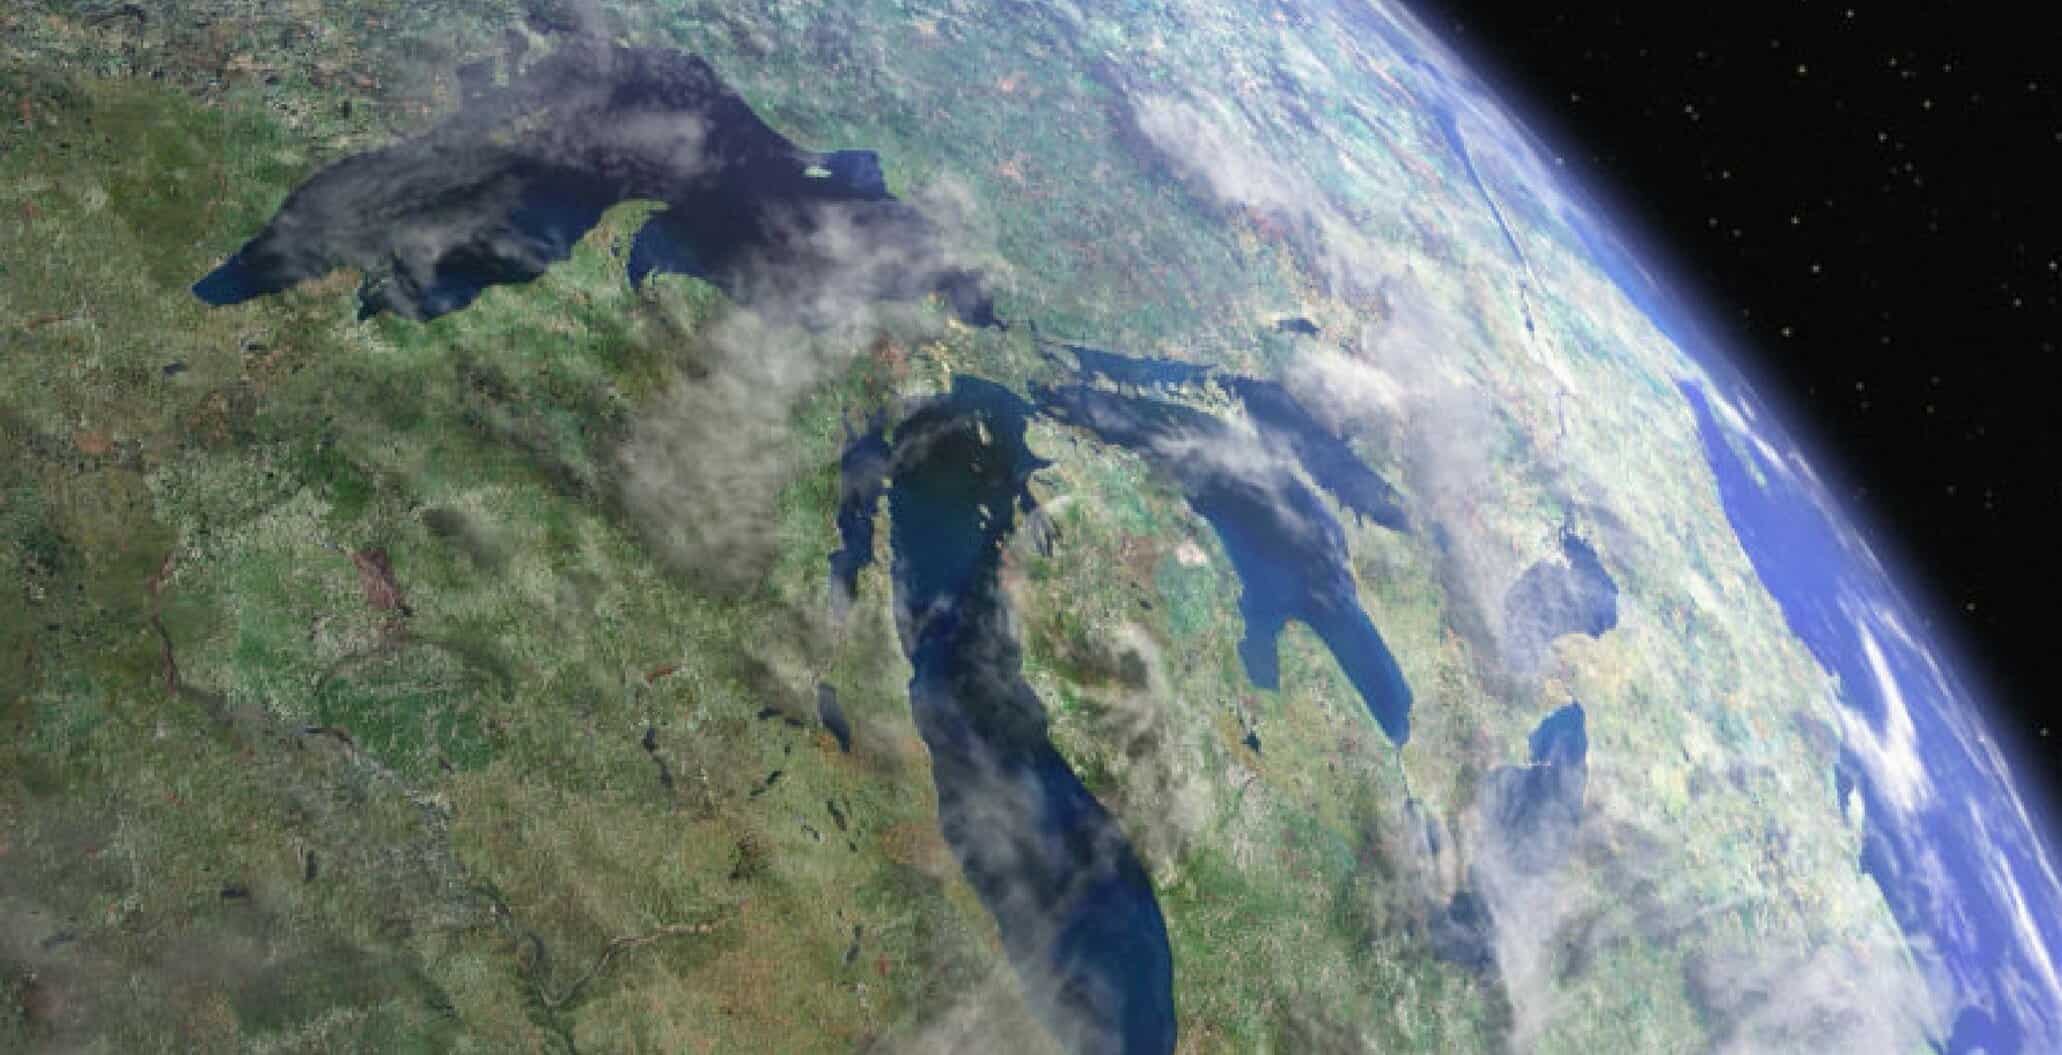 Unprecedented foot dragging by federal court over Line 5 puts our Great Lakes at risk